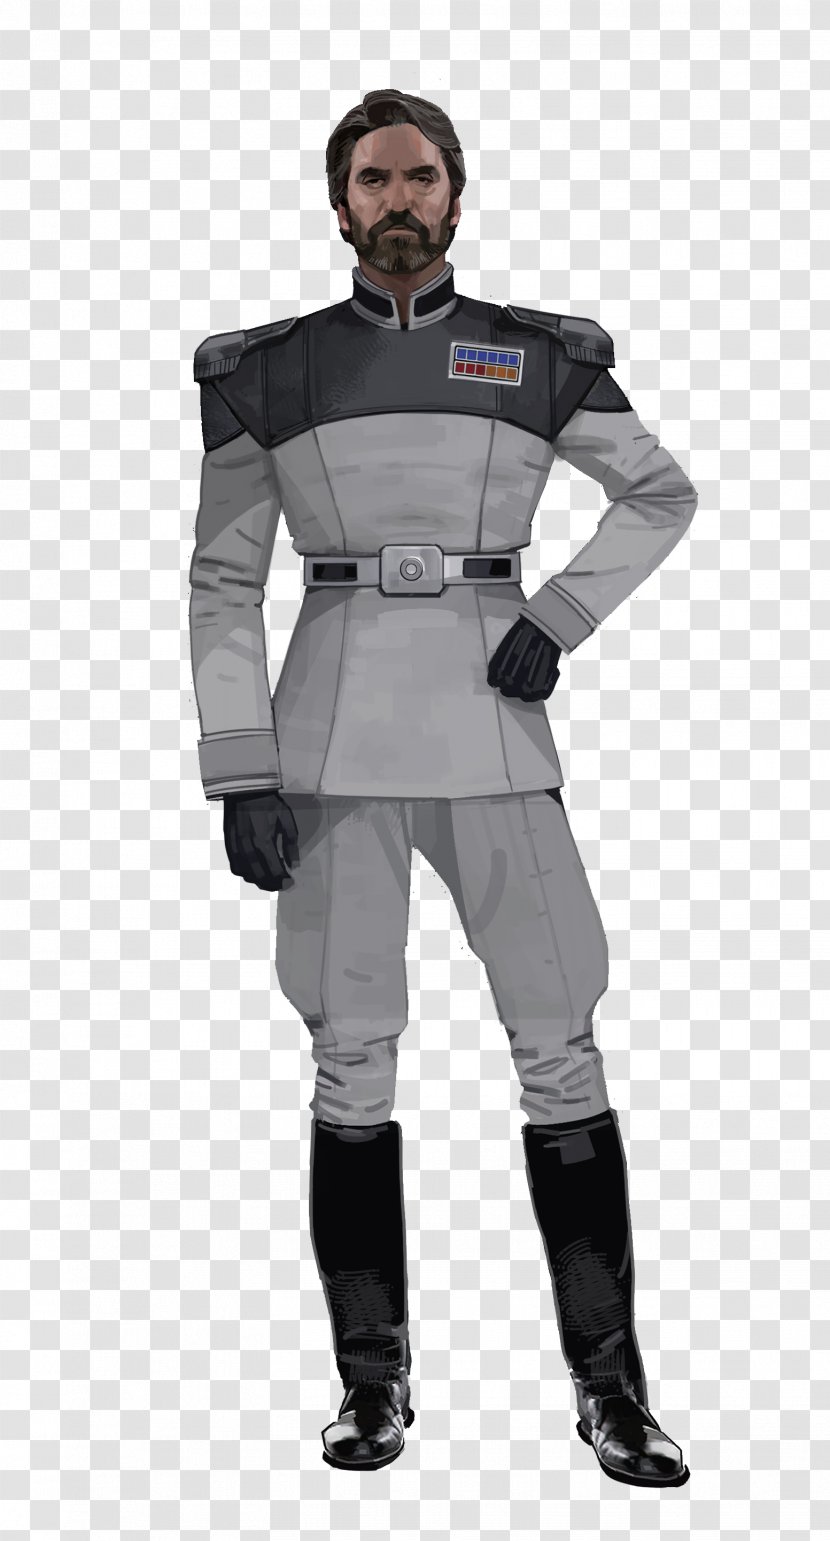 Star Wars Roleplaying Game Stormtrooper Wars: The Last Jedi Role-playing - Jacket - Navy Uniform Transparent PNG